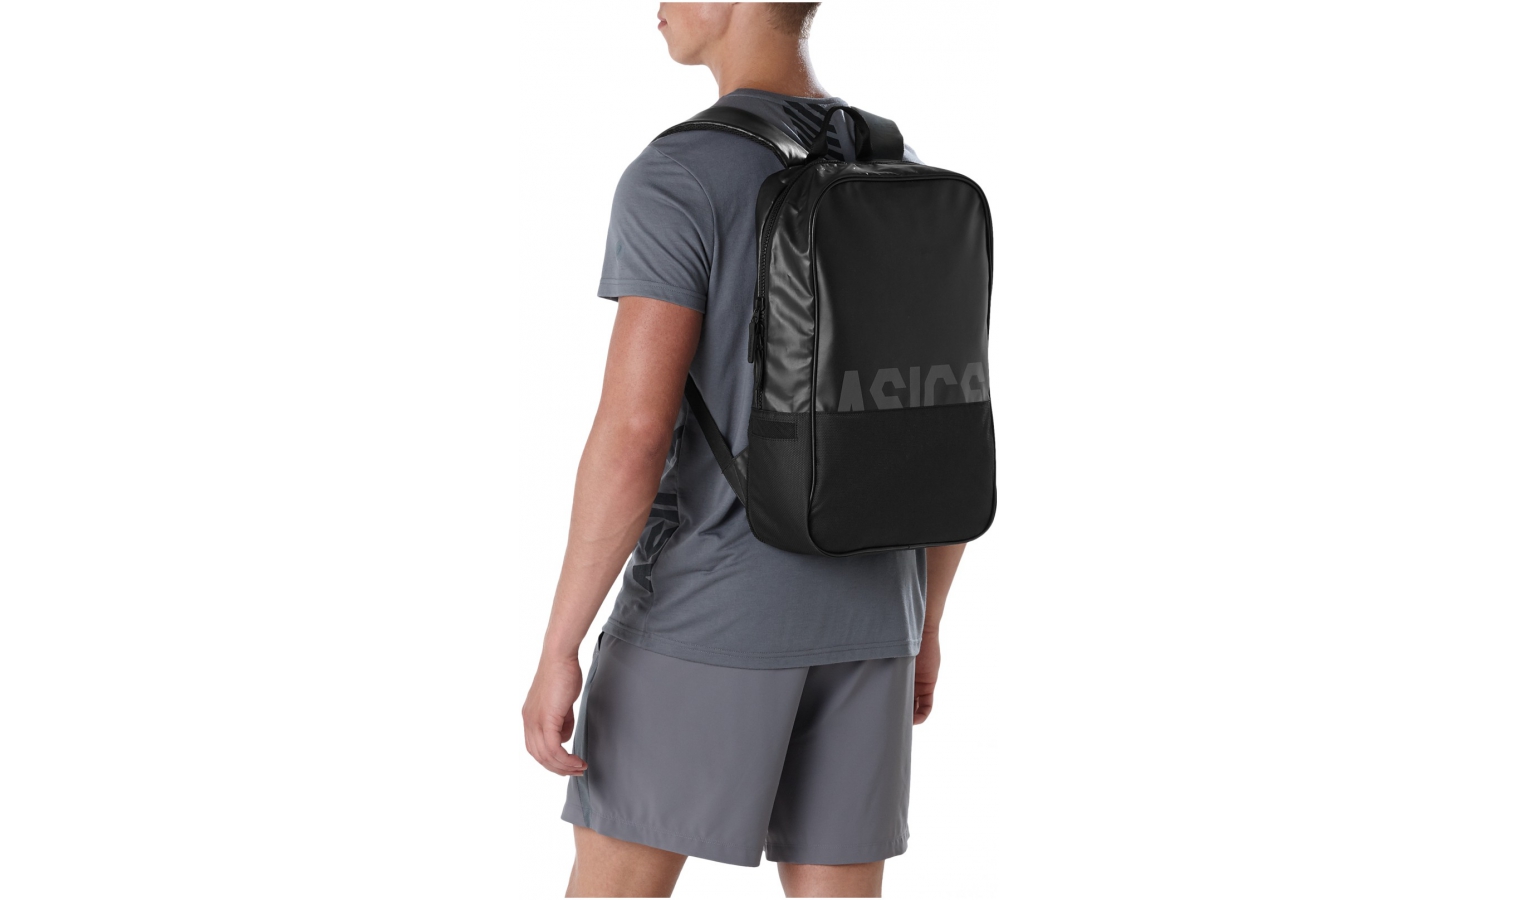 Basic theory warrant Linguistics Backpack Asics TR CORE BACKPACK | AD Sport.store